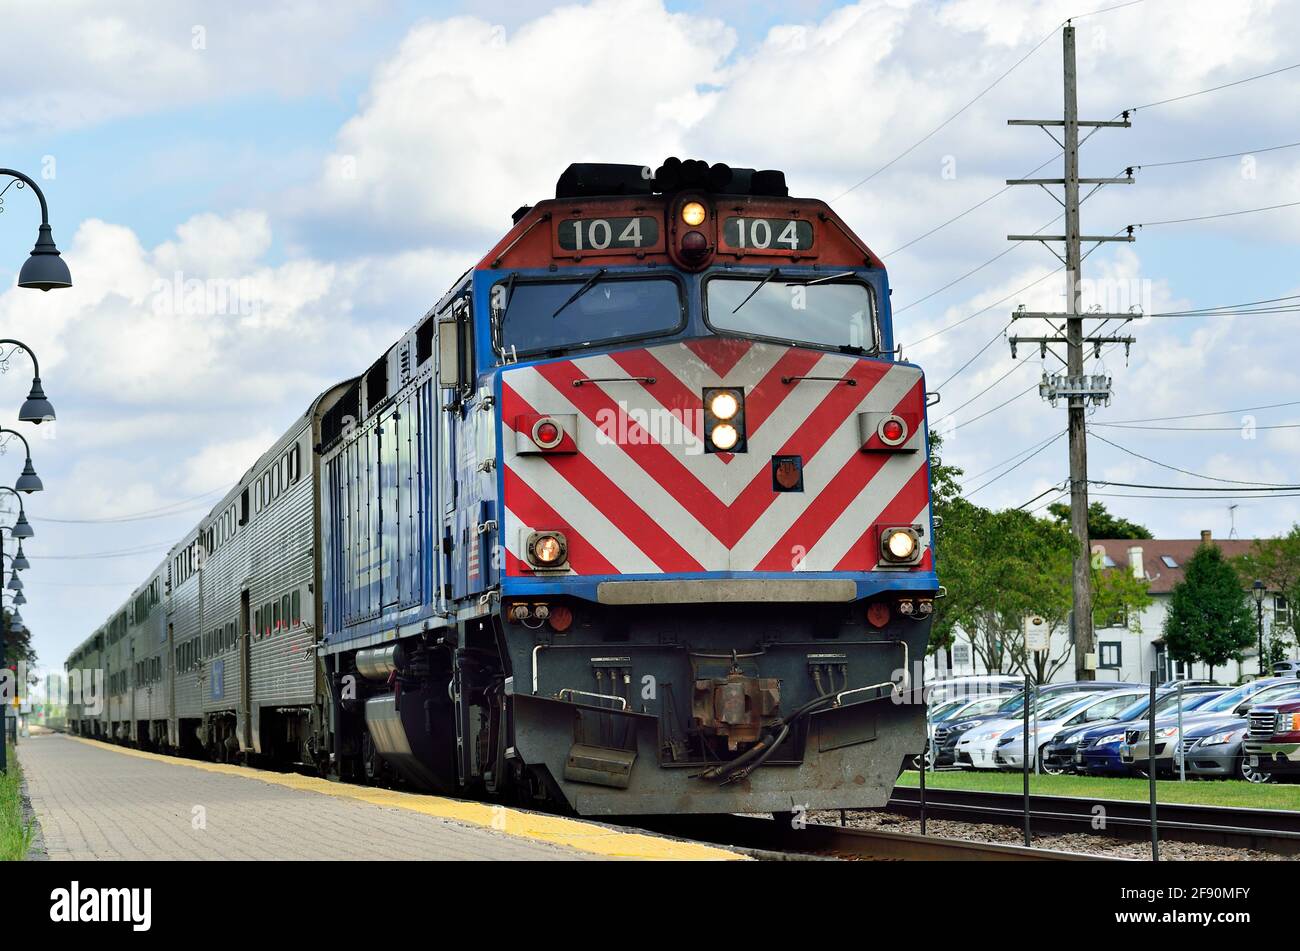 Bartlett, Illinois, USA. An outbound Metra commuter train arriving at the local commuter railroad station. Stock Photo